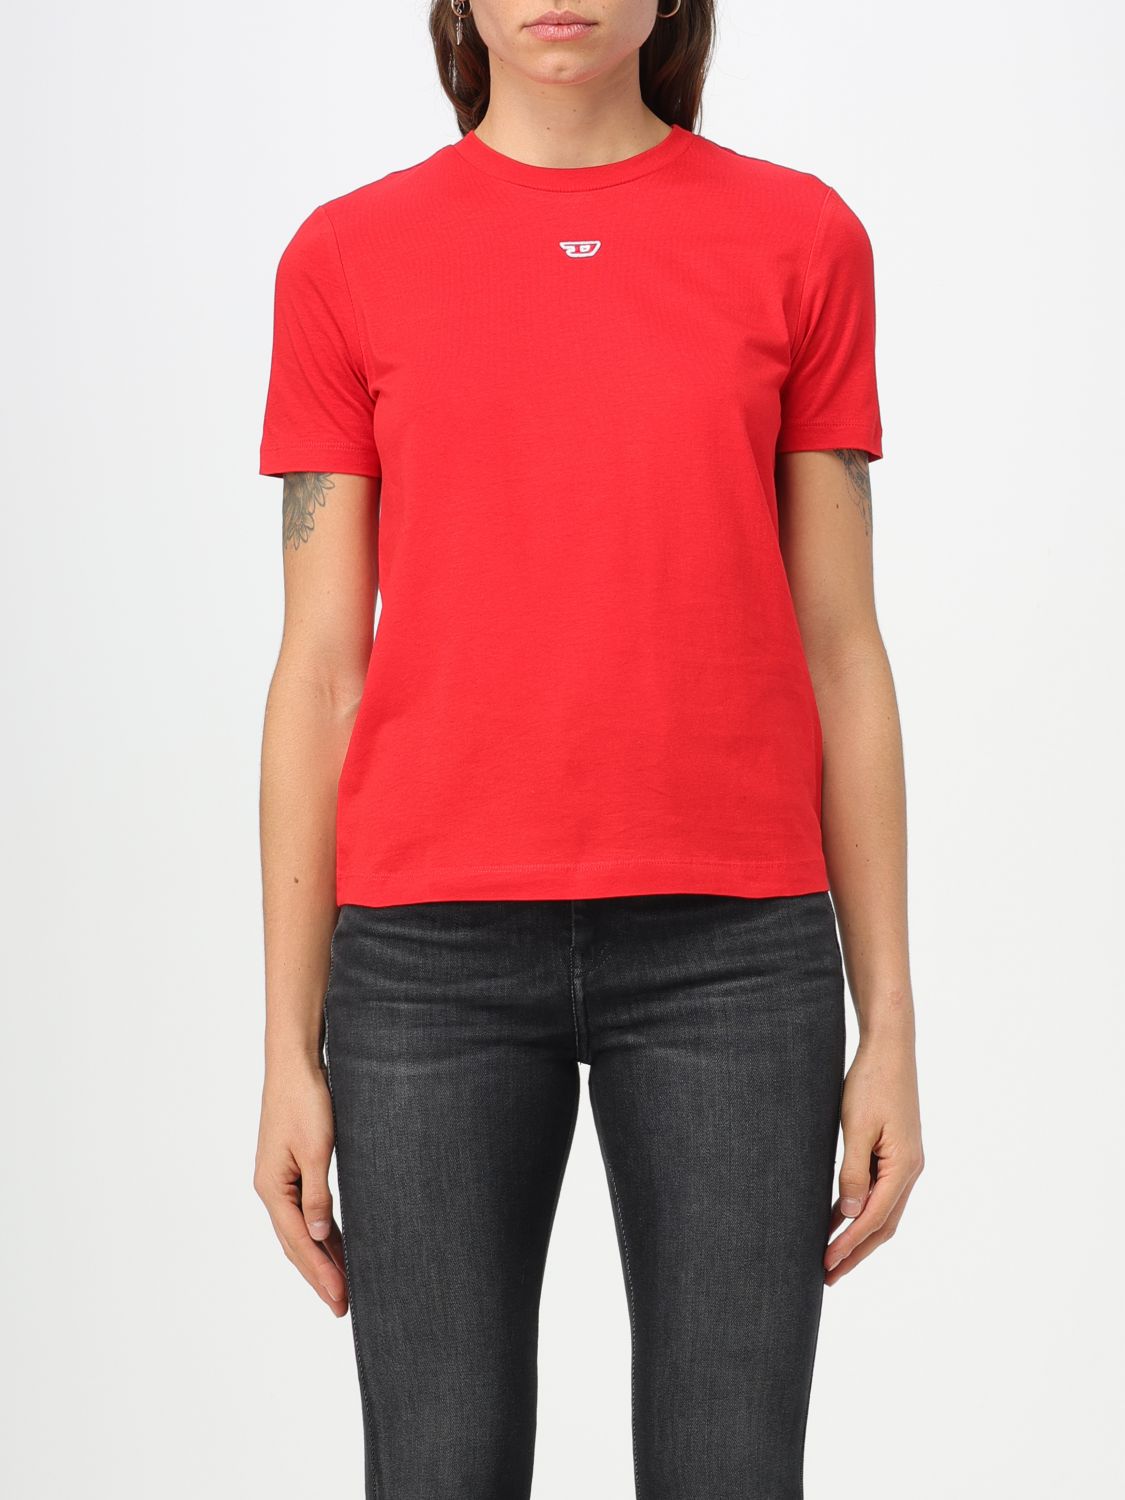 DIESEL COTTON T-SHIRT WITH EMBROIDERED MONOGRAM,E59272014